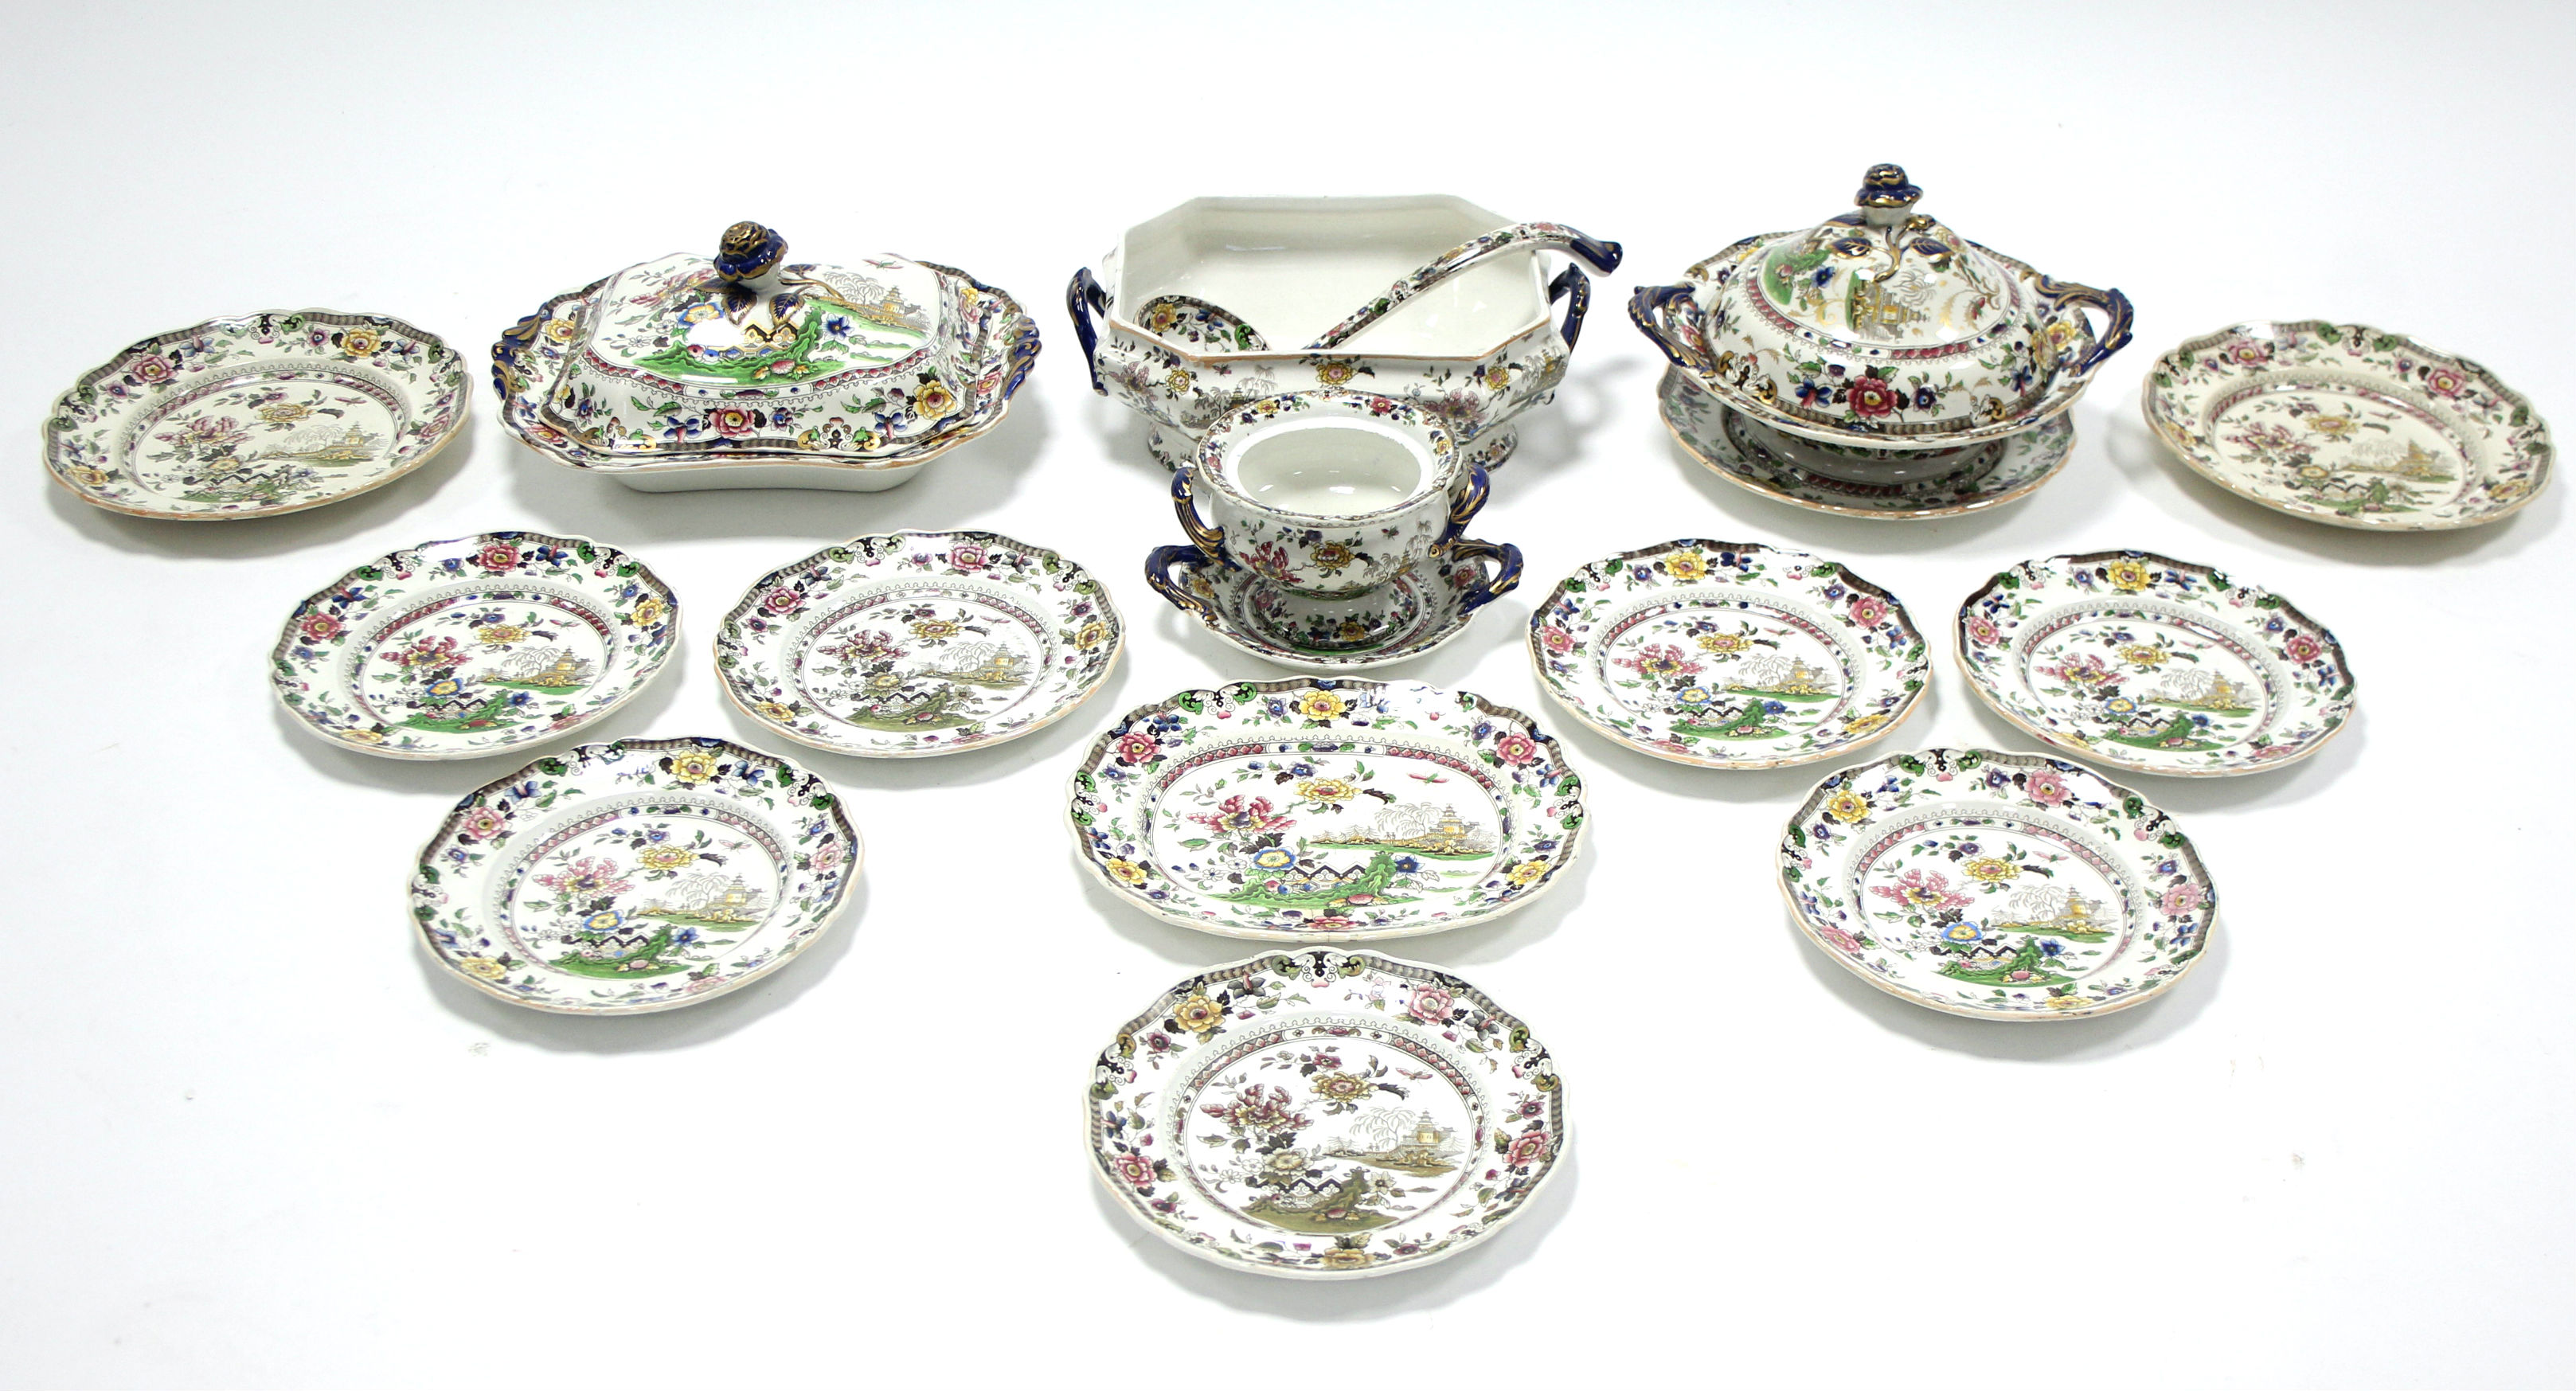 An early 19th century Zacharia Boyle "Chinese Flora" pattern part dinner service, circa 1823-8,